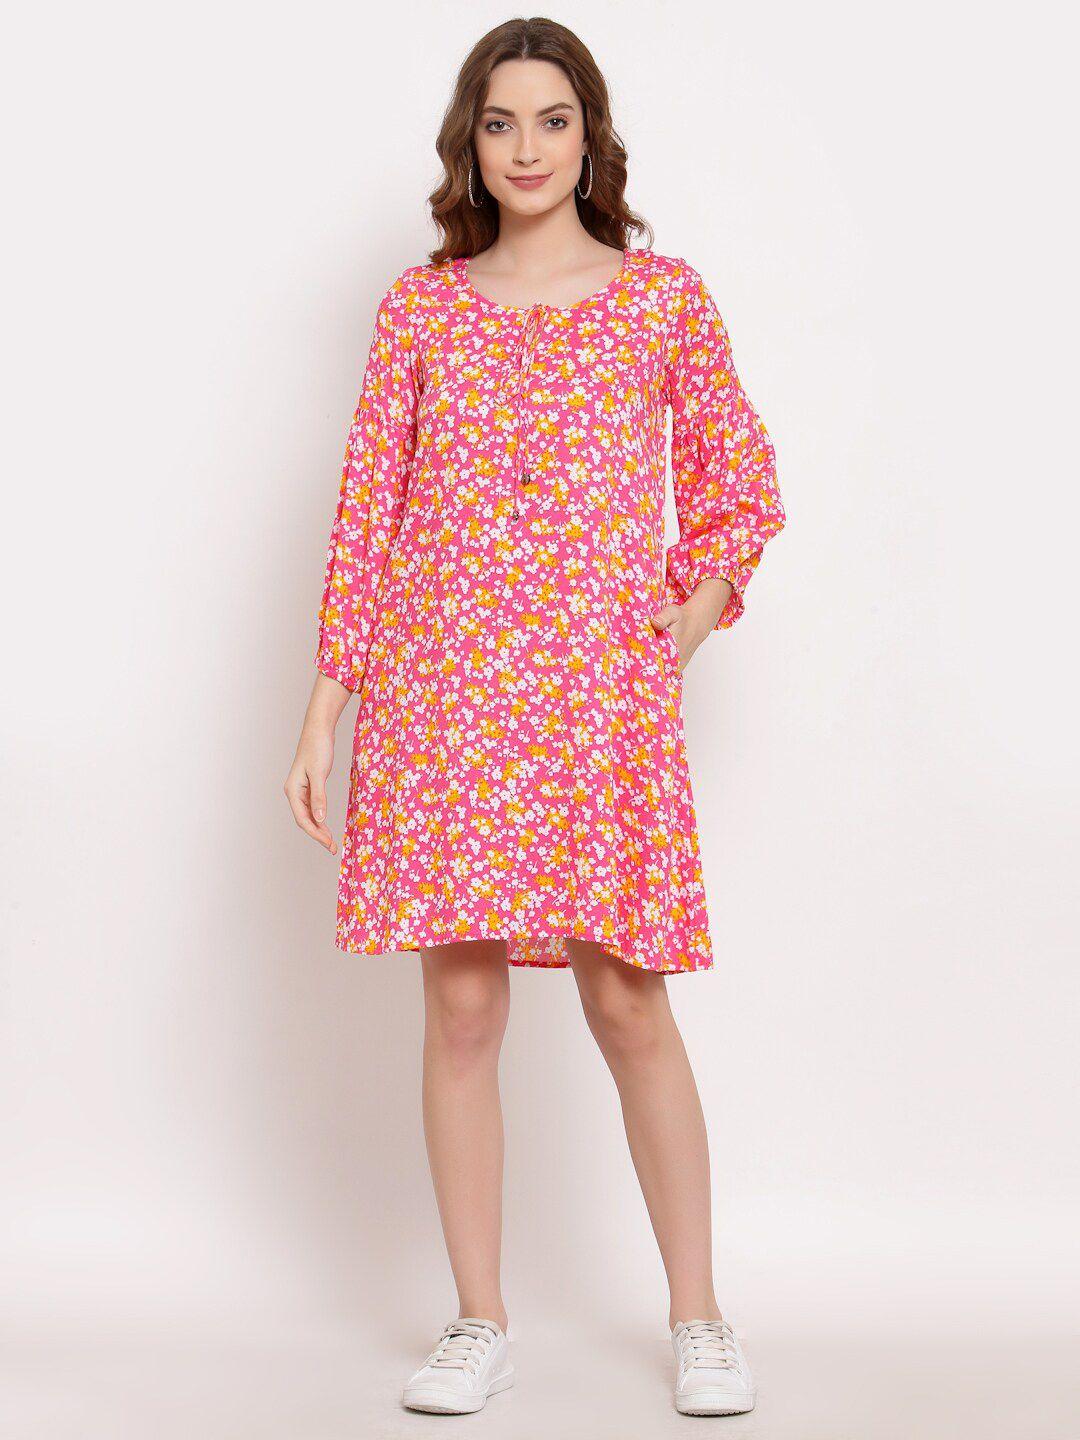 TERQUOIS Pink Floral A-Line Dress